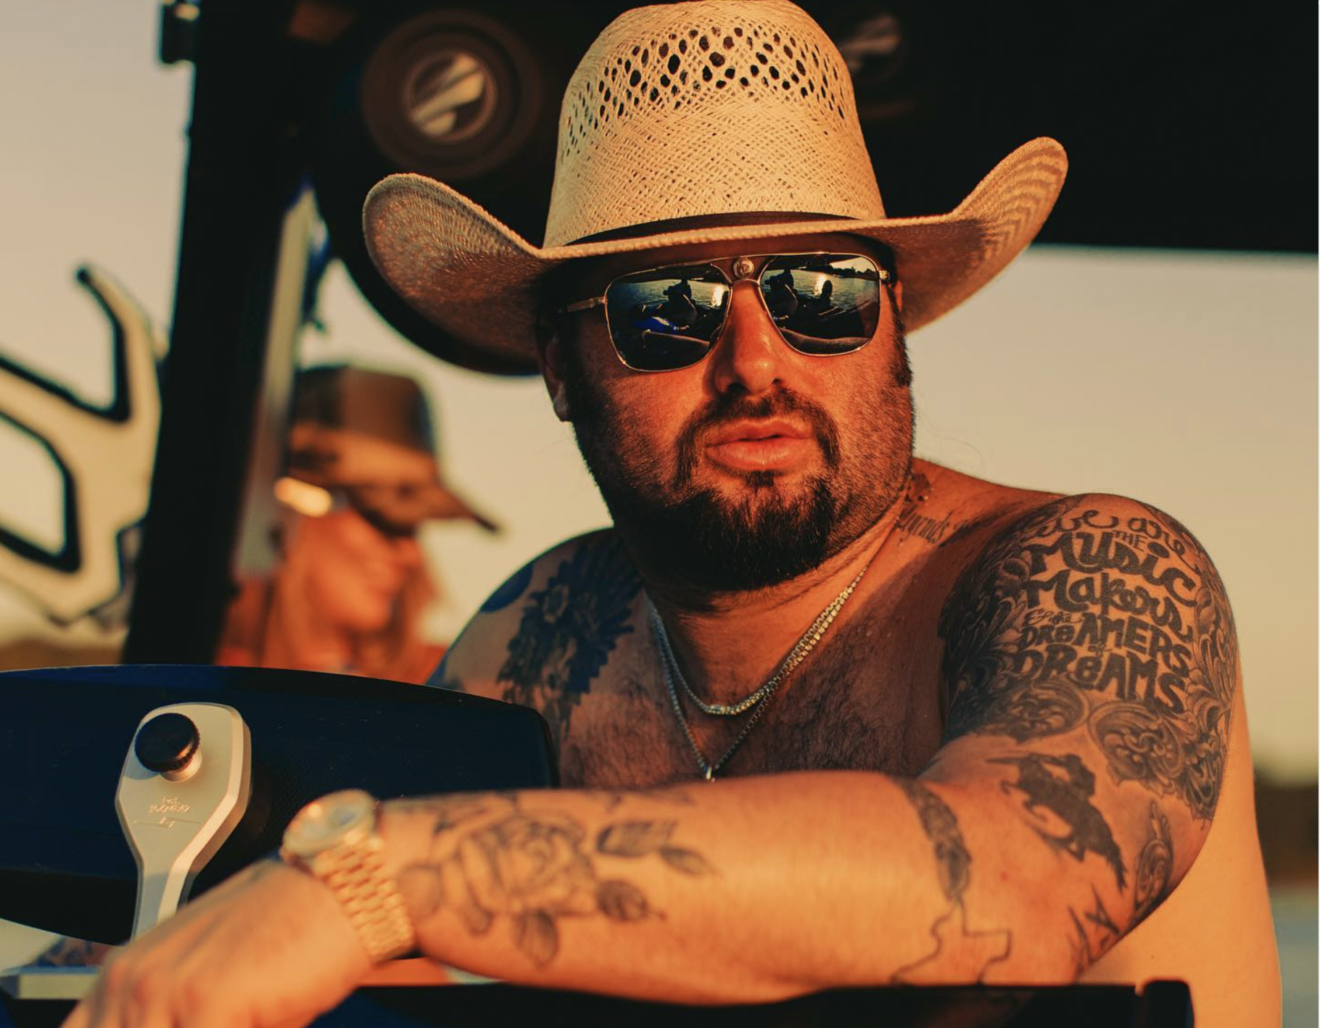 Koe Wetzel Released "Harold Saul High" On This Day 4 Years Ago